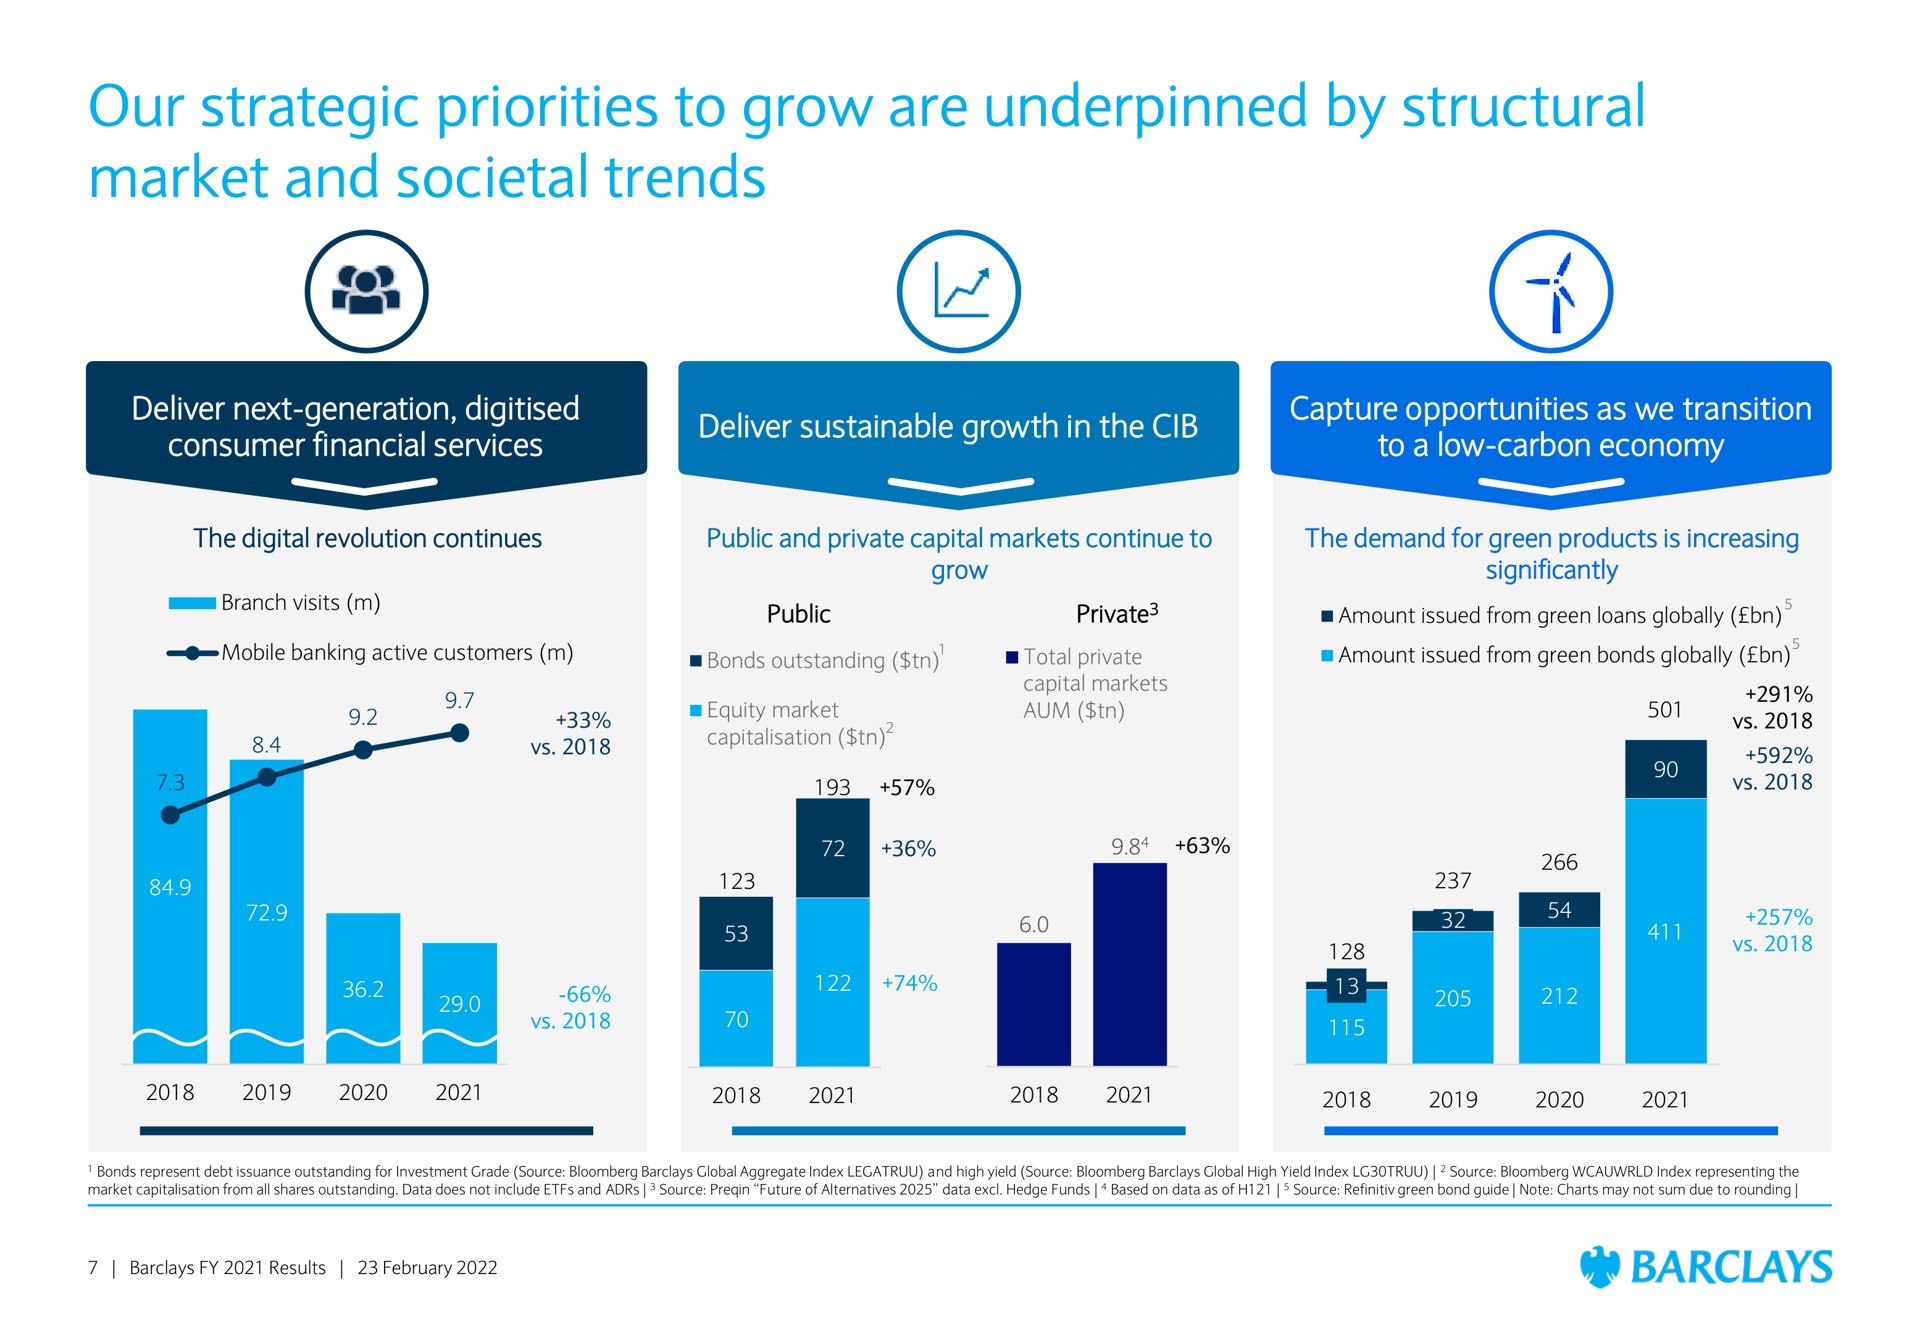 our strategic priorities to grow are underpinned by structural market and societal trends | Barclays